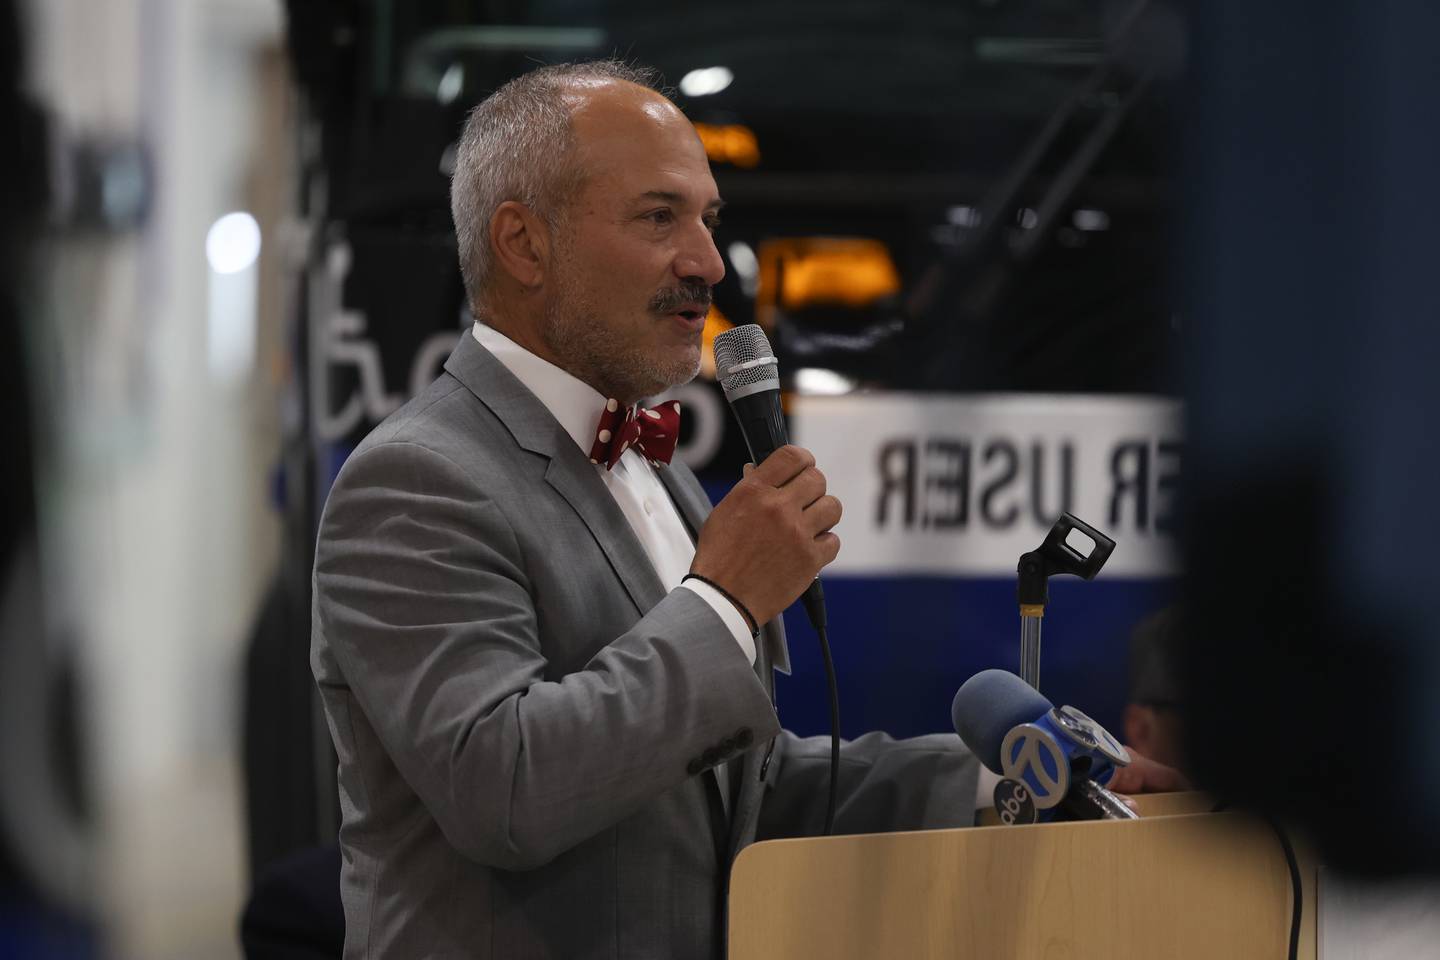 Plainfield Mayor John Argoudelis speaks at Pace’s new 264,000 square foot state-of-the-art facility in Plainfield on Thursday. Thursday, July 21, 2022 in Plainfield.